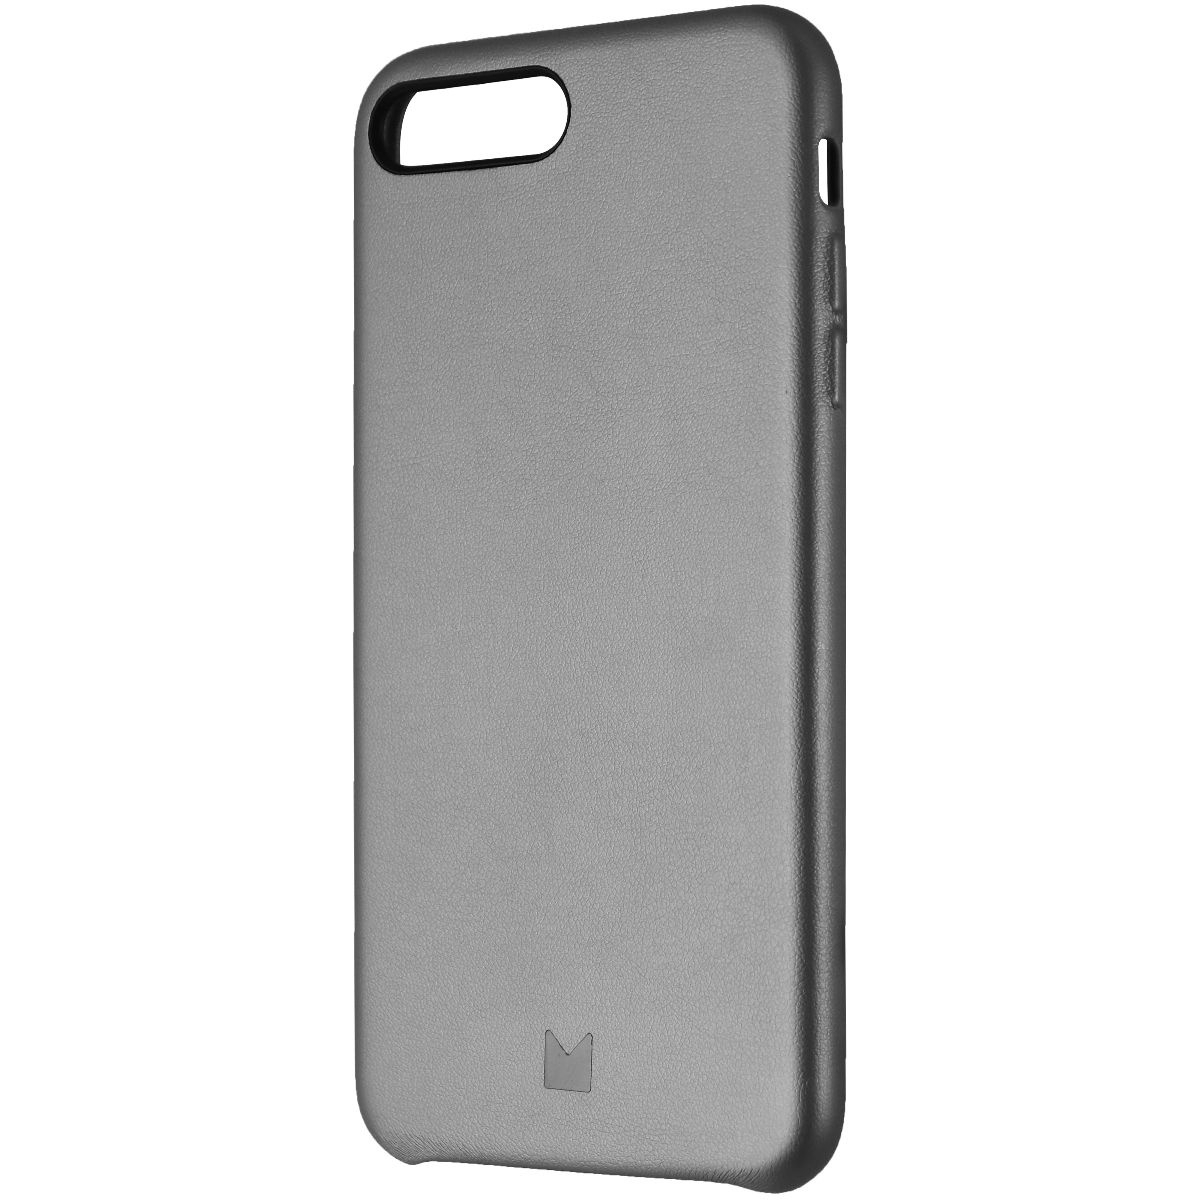 Modal Luxicon Pearl Protective Case Cover For Apple IPhone 7+ (Plus) - Gray